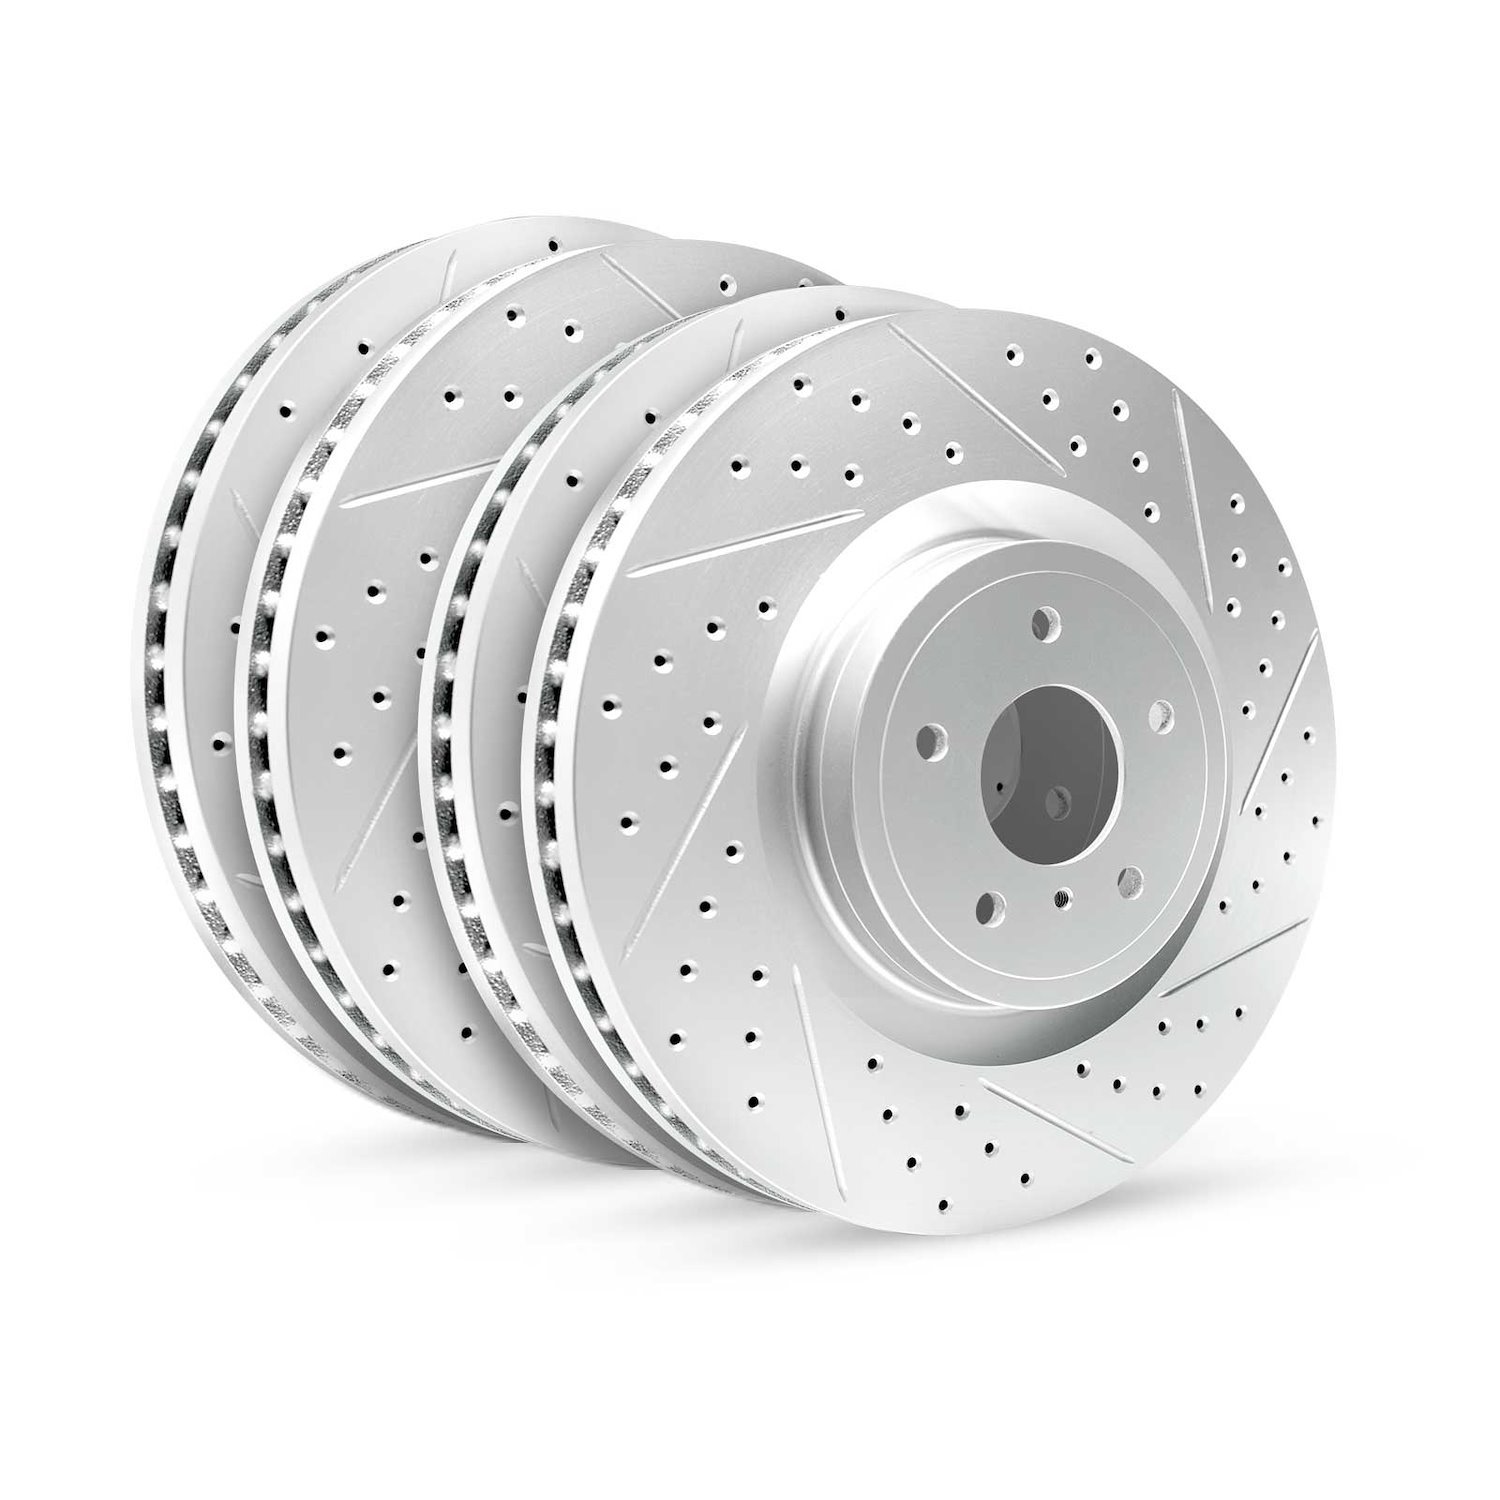 GEO-Carbon Drilled/Slotted Rotors, 2002-2006 BMW, Position: Front/Rear